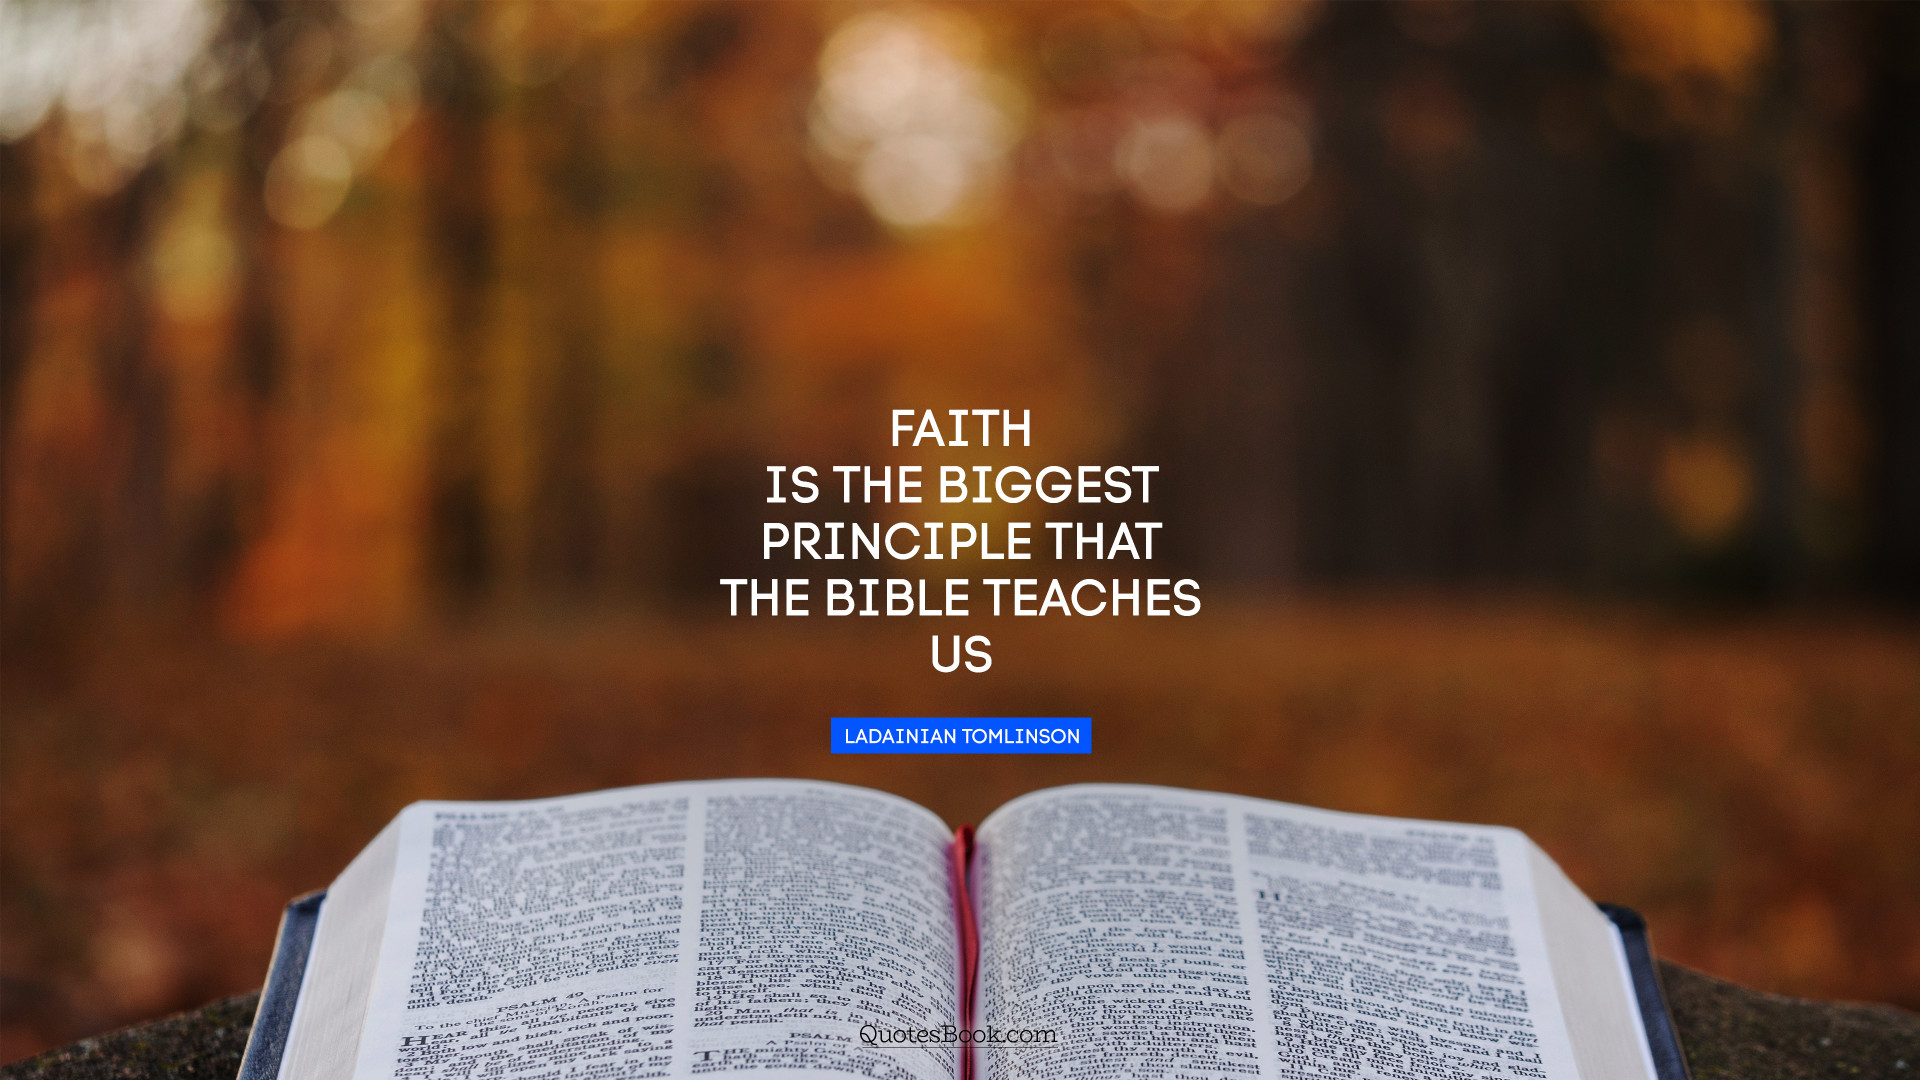 Faith is the biggest principle that the Bible teaches us. - Quote by